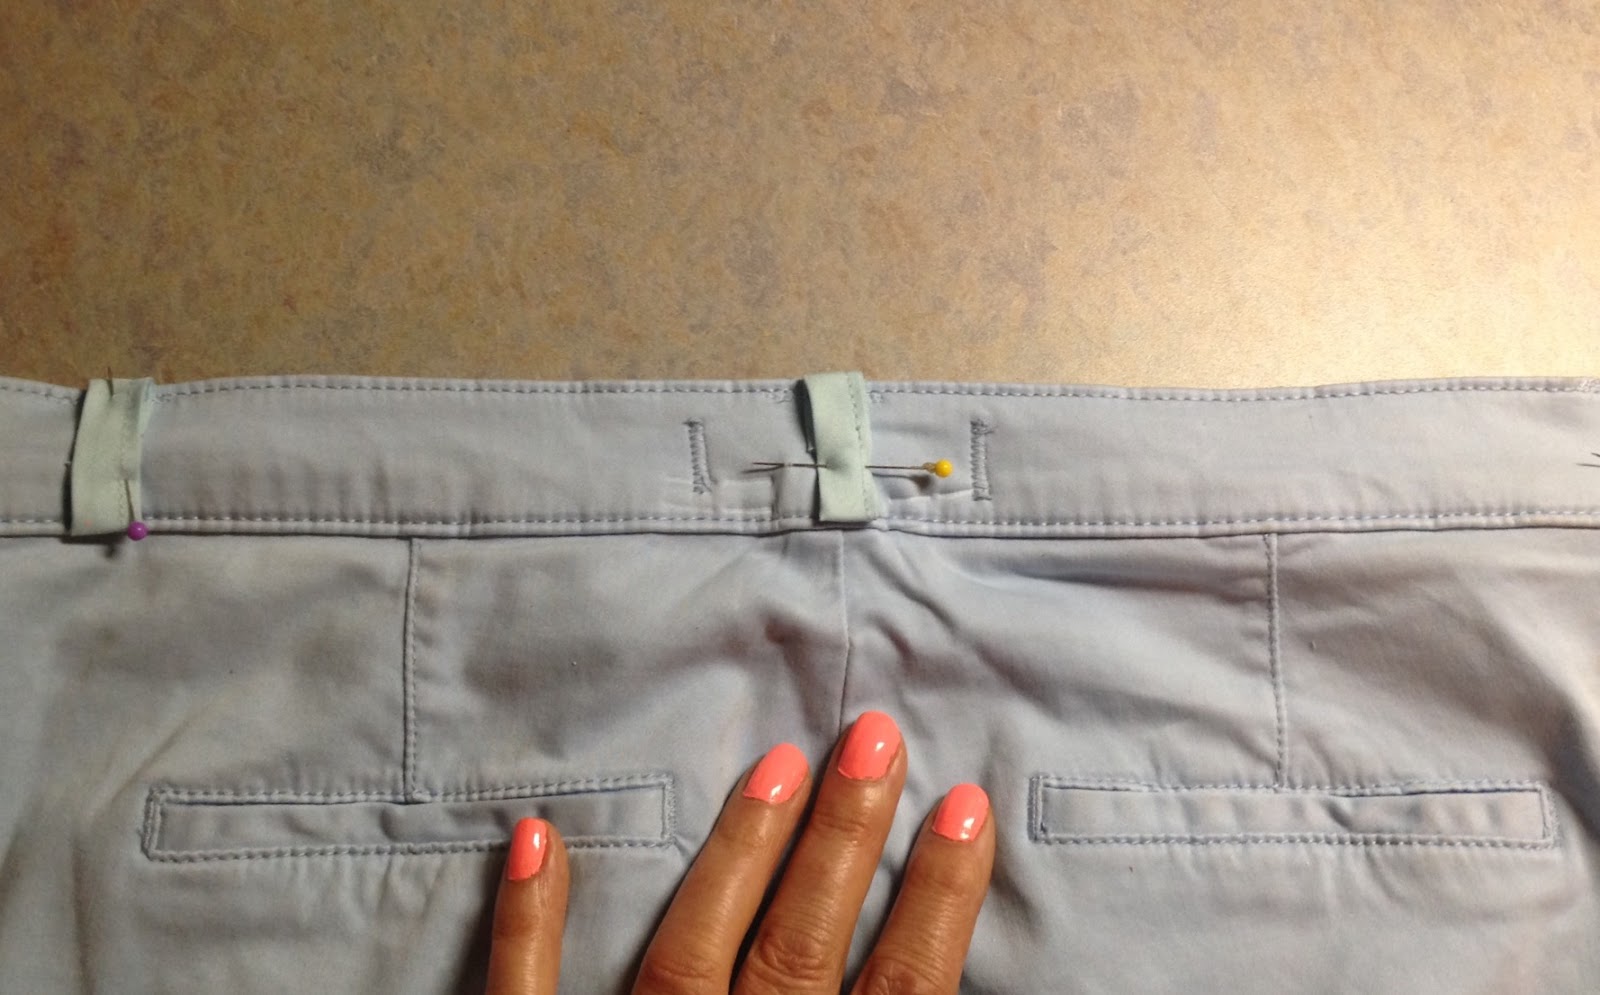 How to Sew Belt Loops: Step-by-Step Instructions